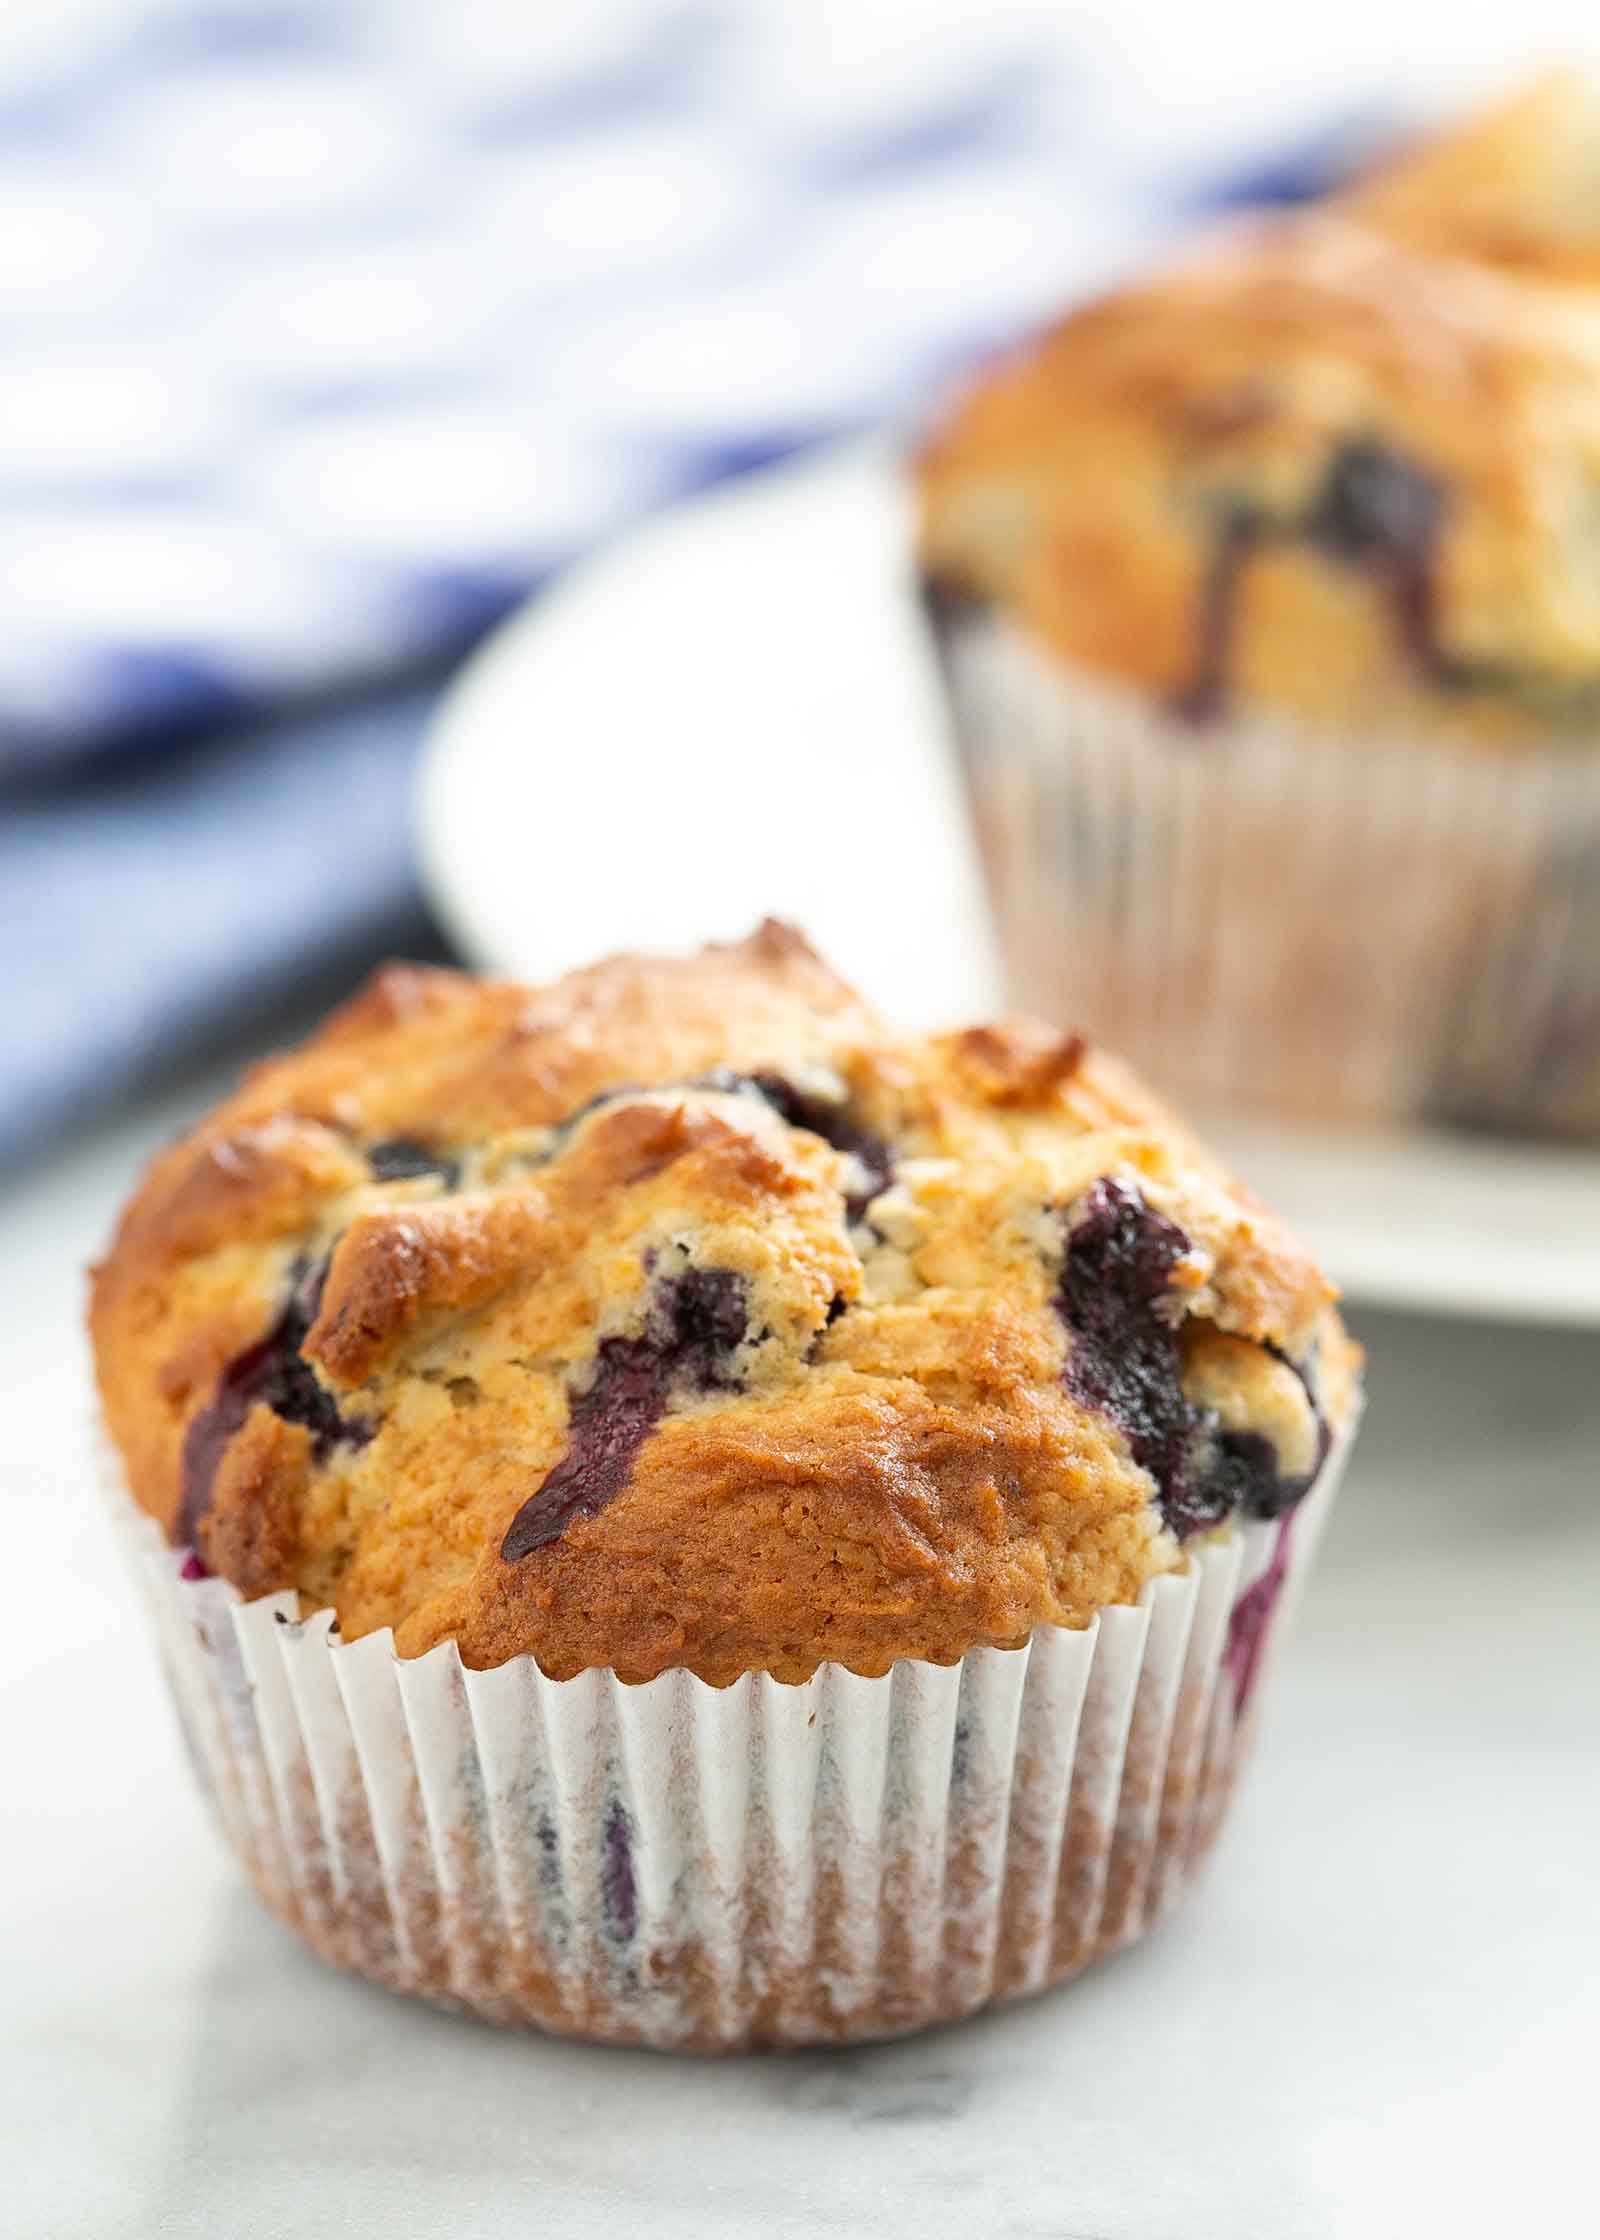 Easy Blueberry Muffins fresh from the oven